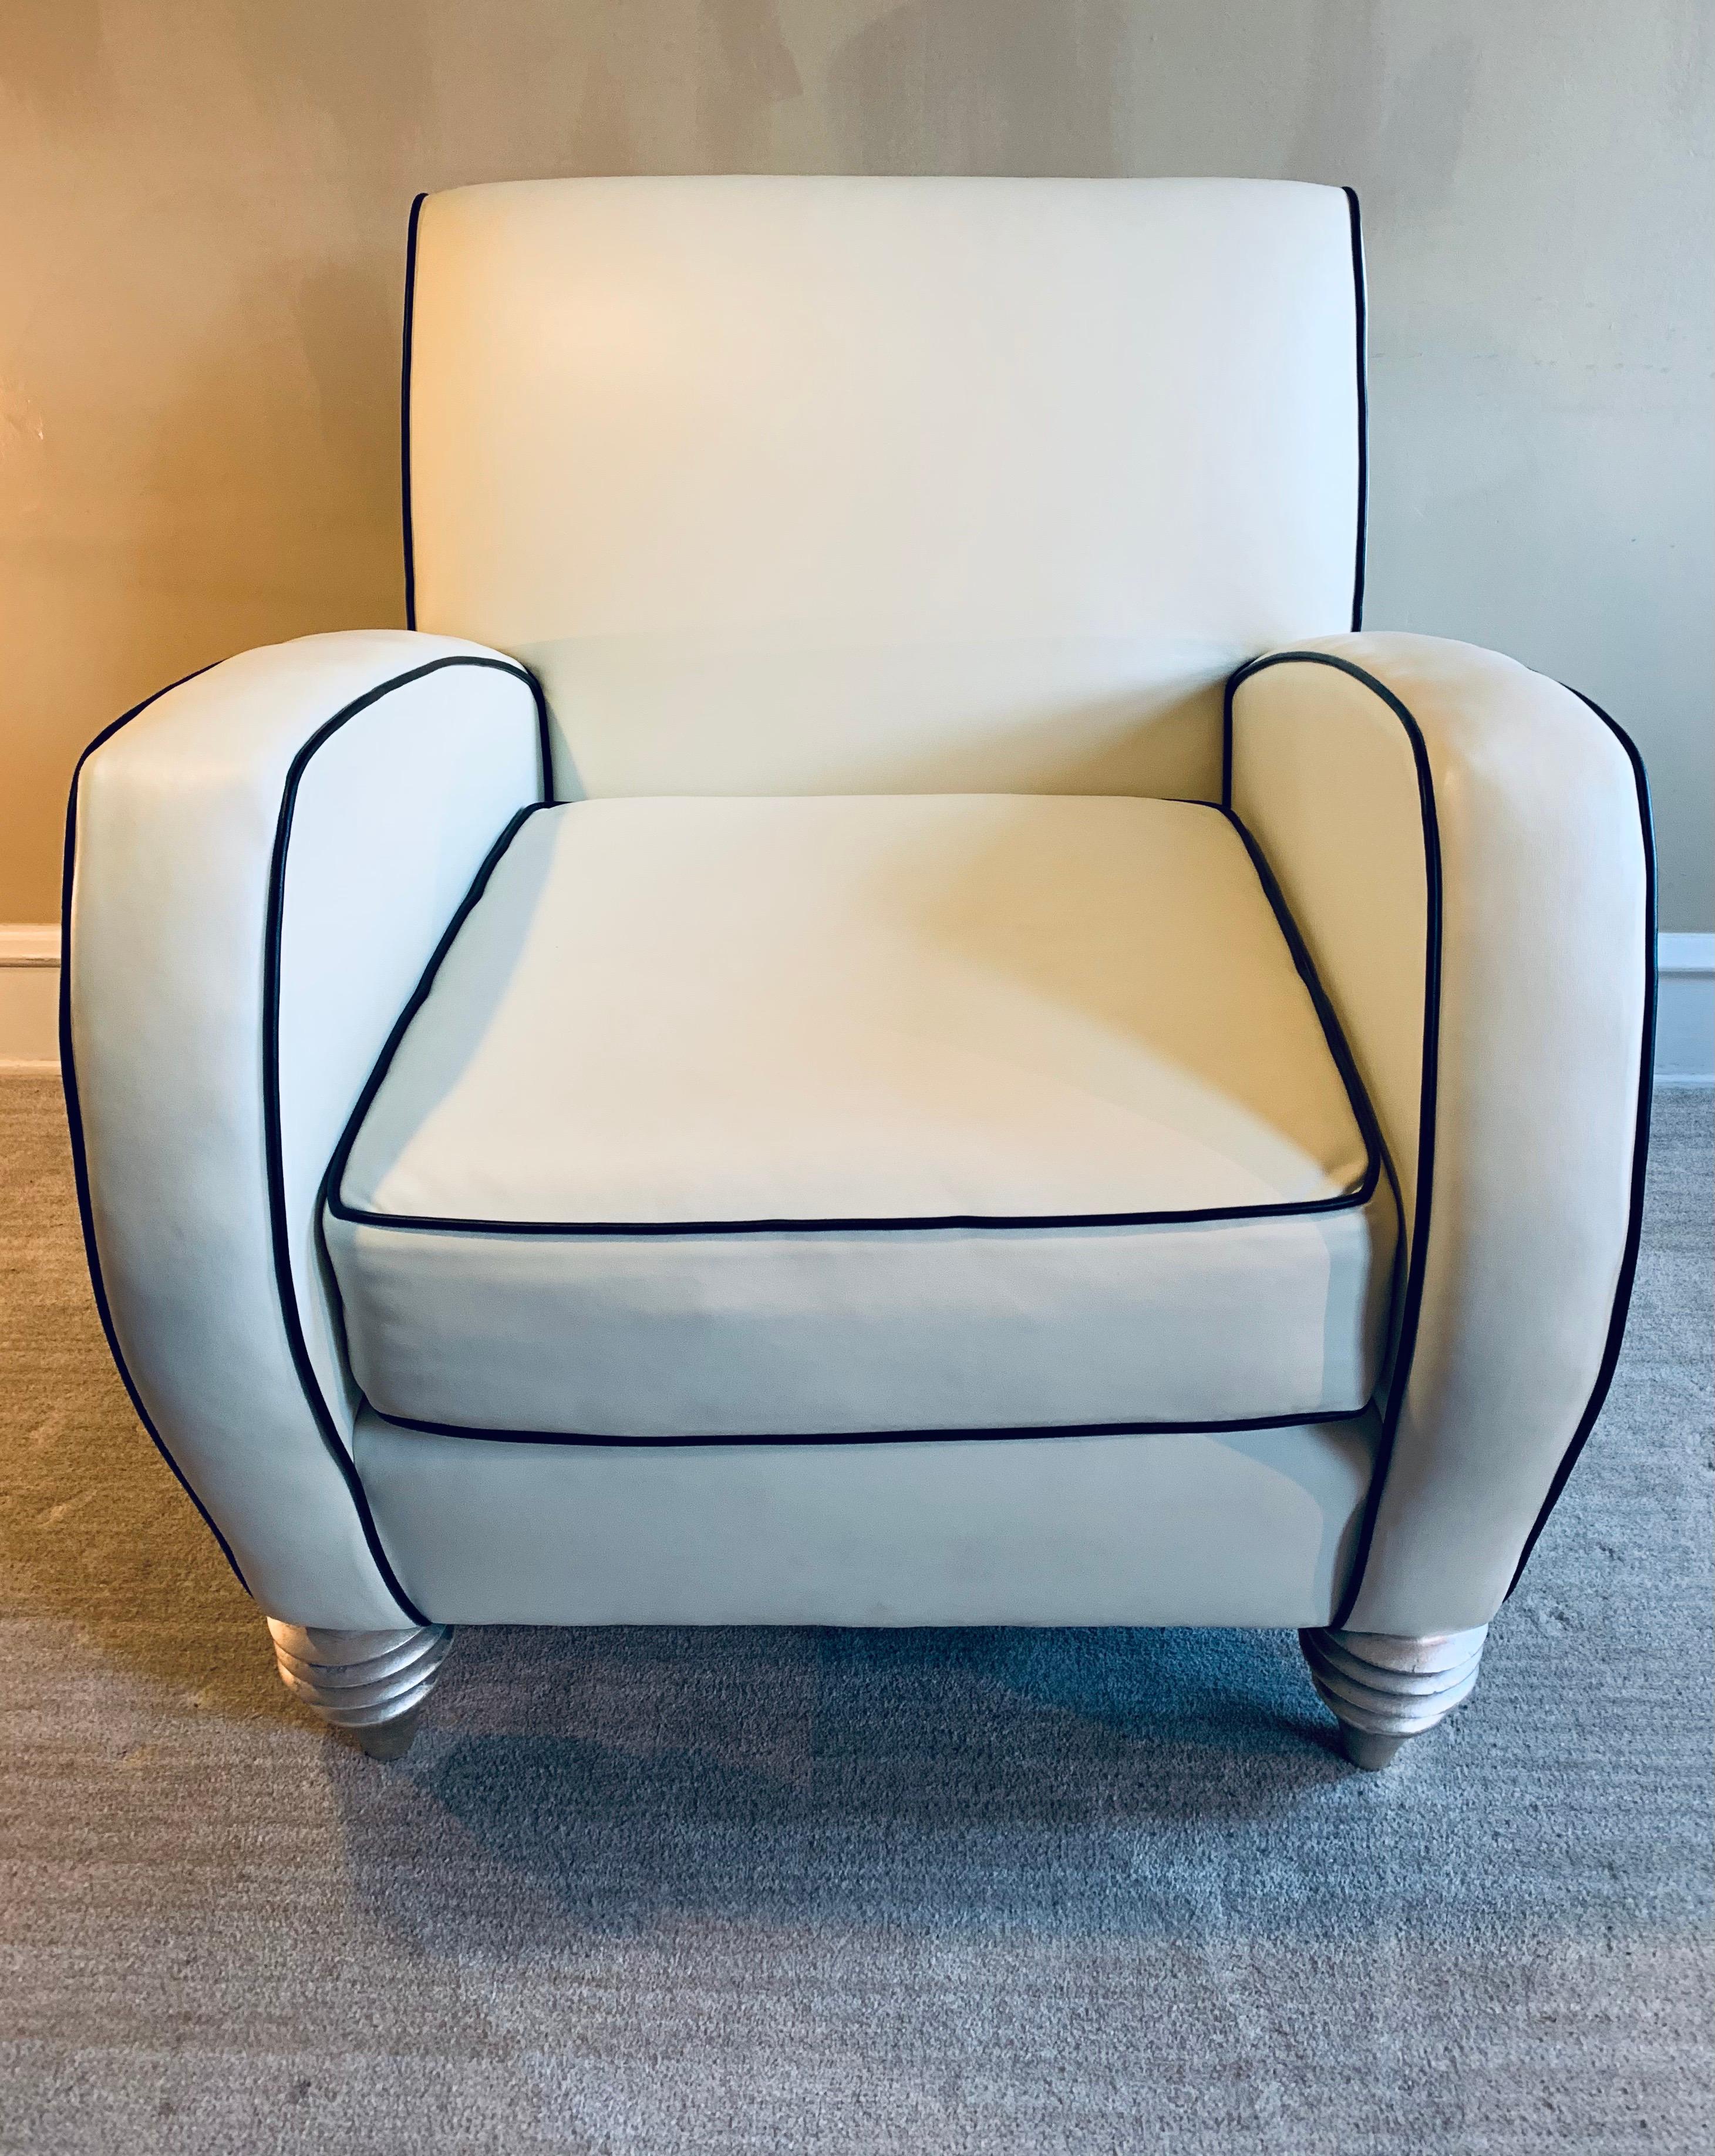 The most buttery leather club chair in ivory leather with black leather piping. 

Nary a child nor a pet has ever come close to this piece. It’s truly pristine. 

Additionally, it’s amazingly comfortable.